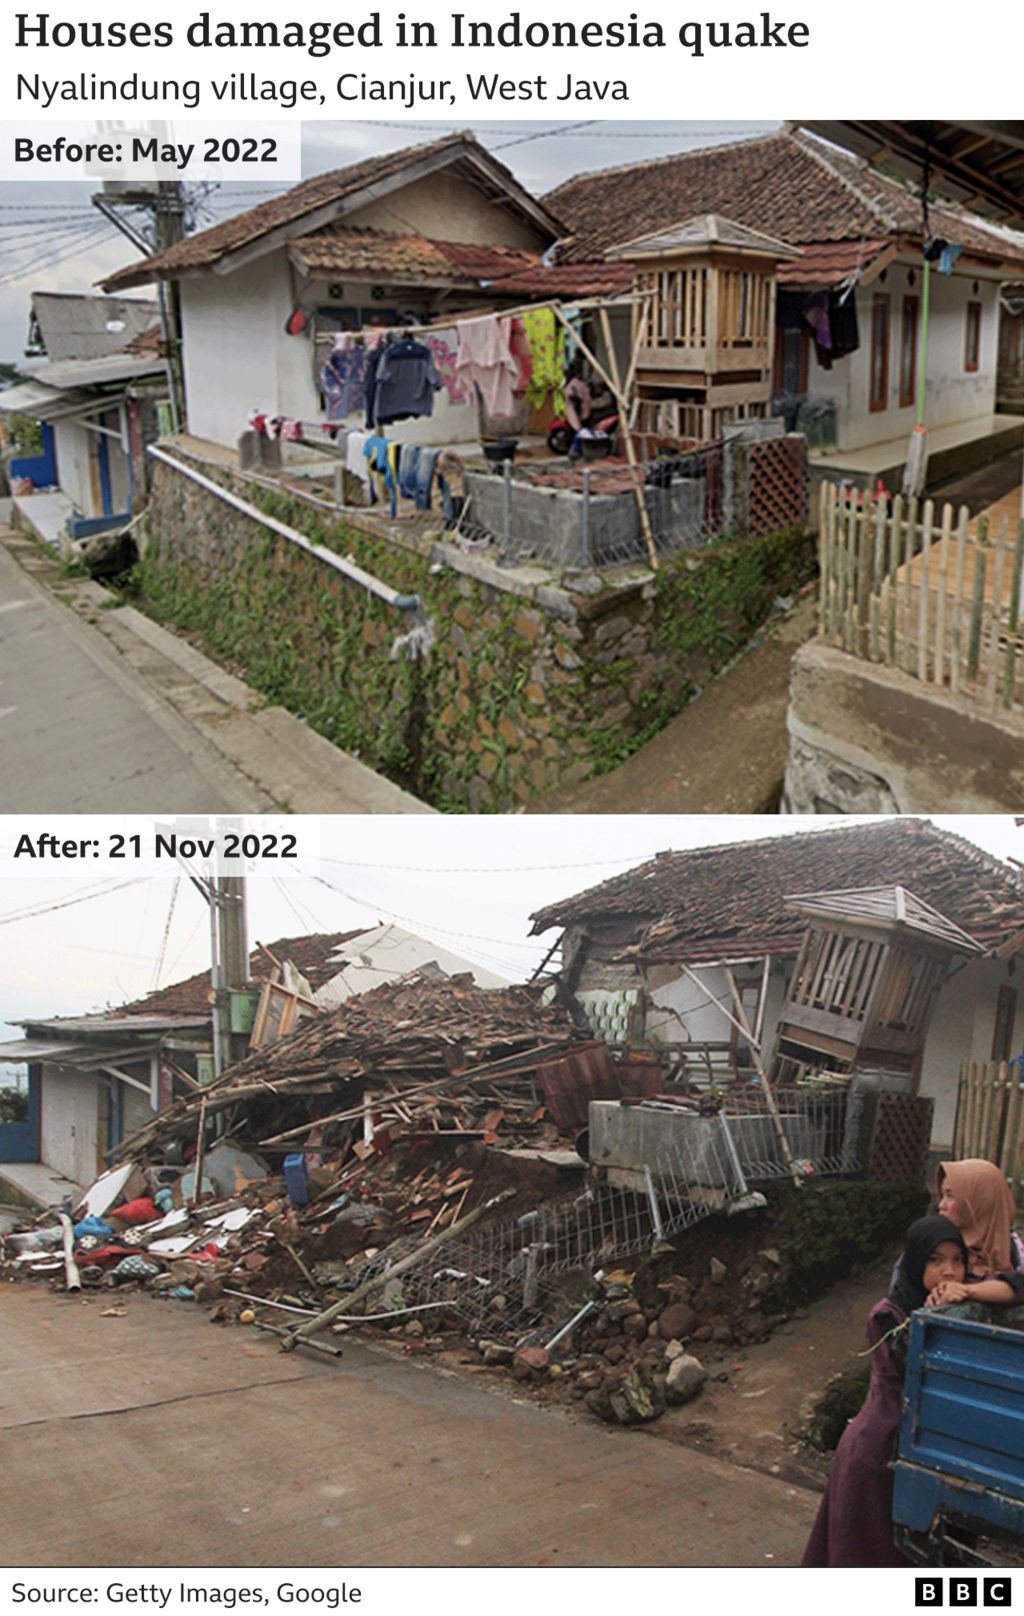 Two photos show houses in Nyalindung village, Cianjur, West Java - before Monday's quake, and collapsed or damaged afterwards